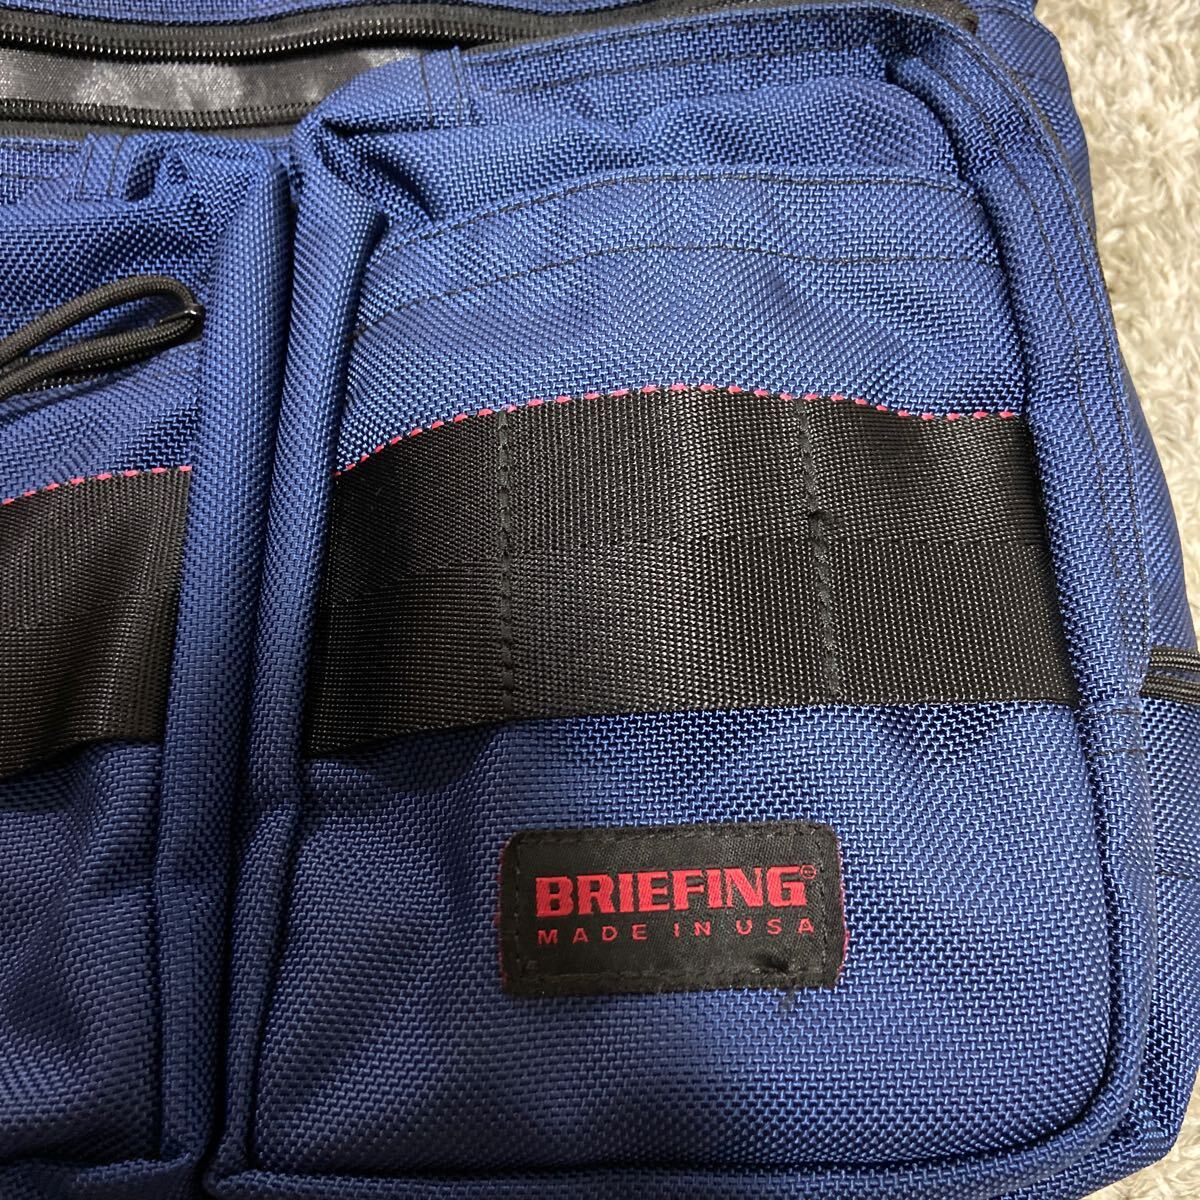 BRIEFING ブリーフィング トートバッグ ミッドナイト アメリカ製 ビジネストートBS TOTE WIDE _画像7